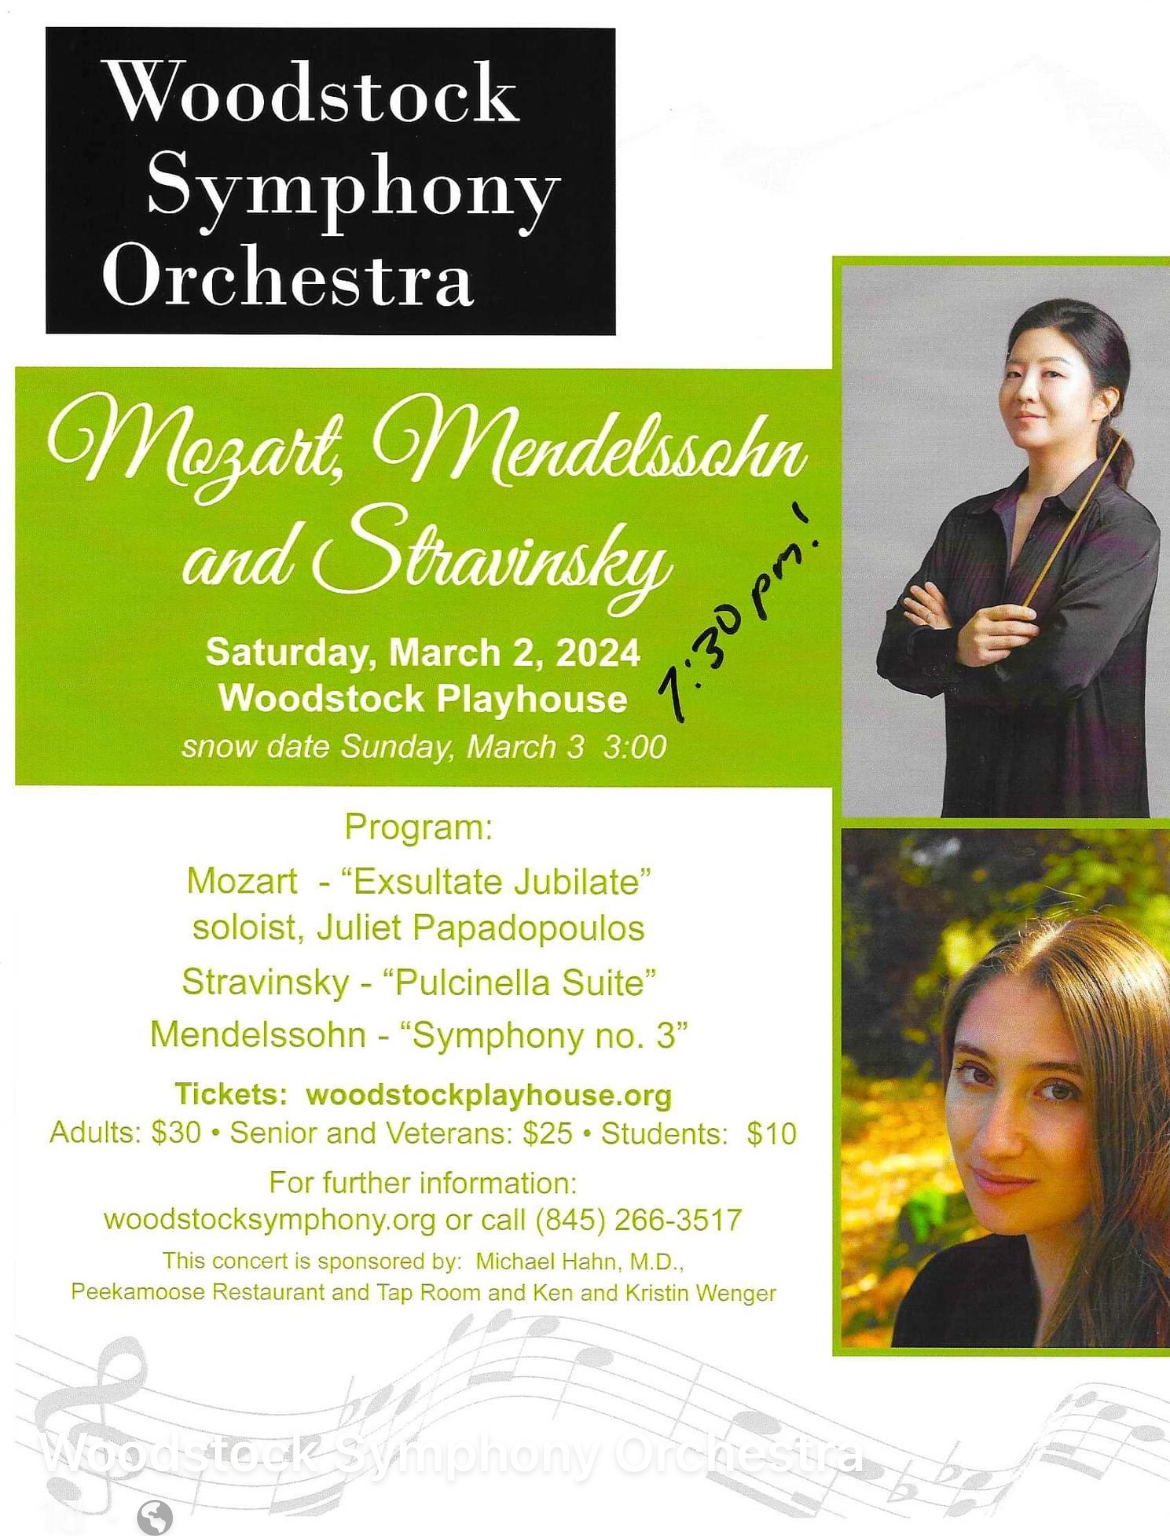 event flyer for Woodstock Symphony Orchestra